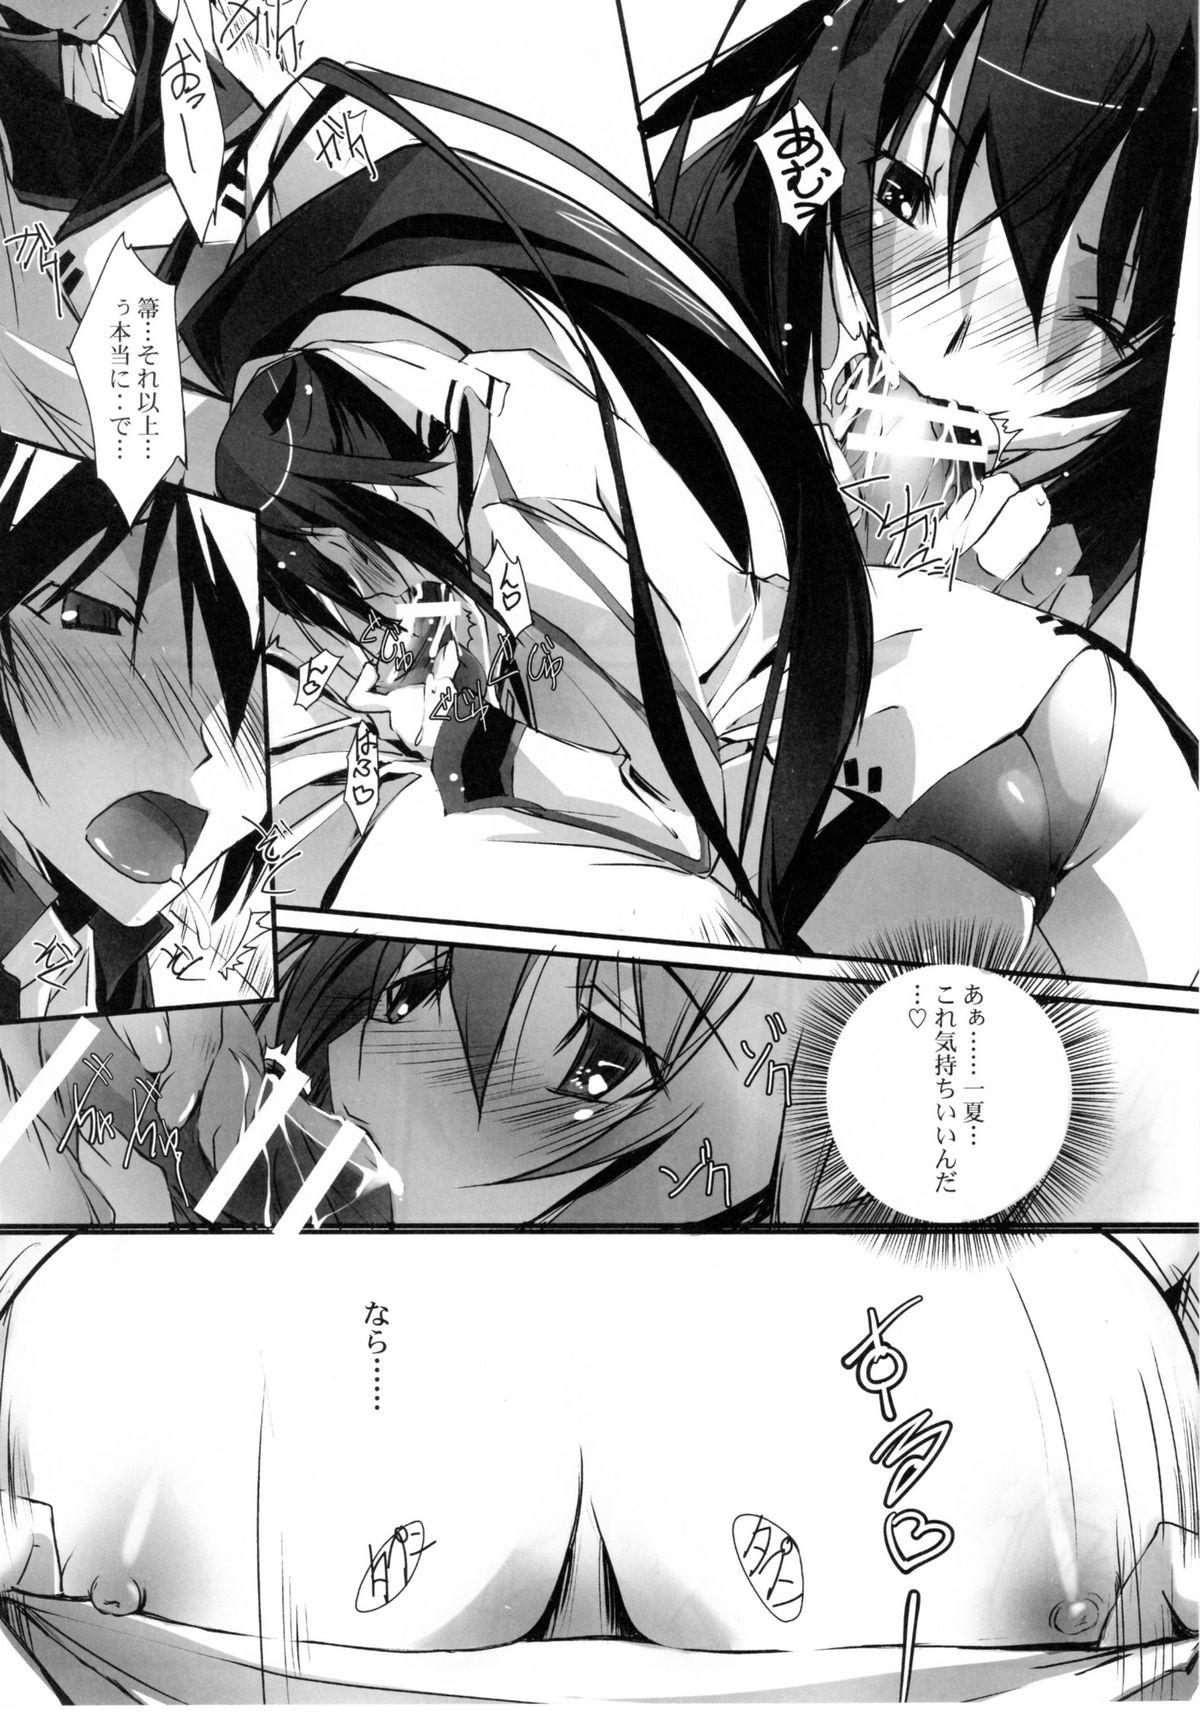 Family LS Lovers Striker - Infinite stratos Edging - Page 7